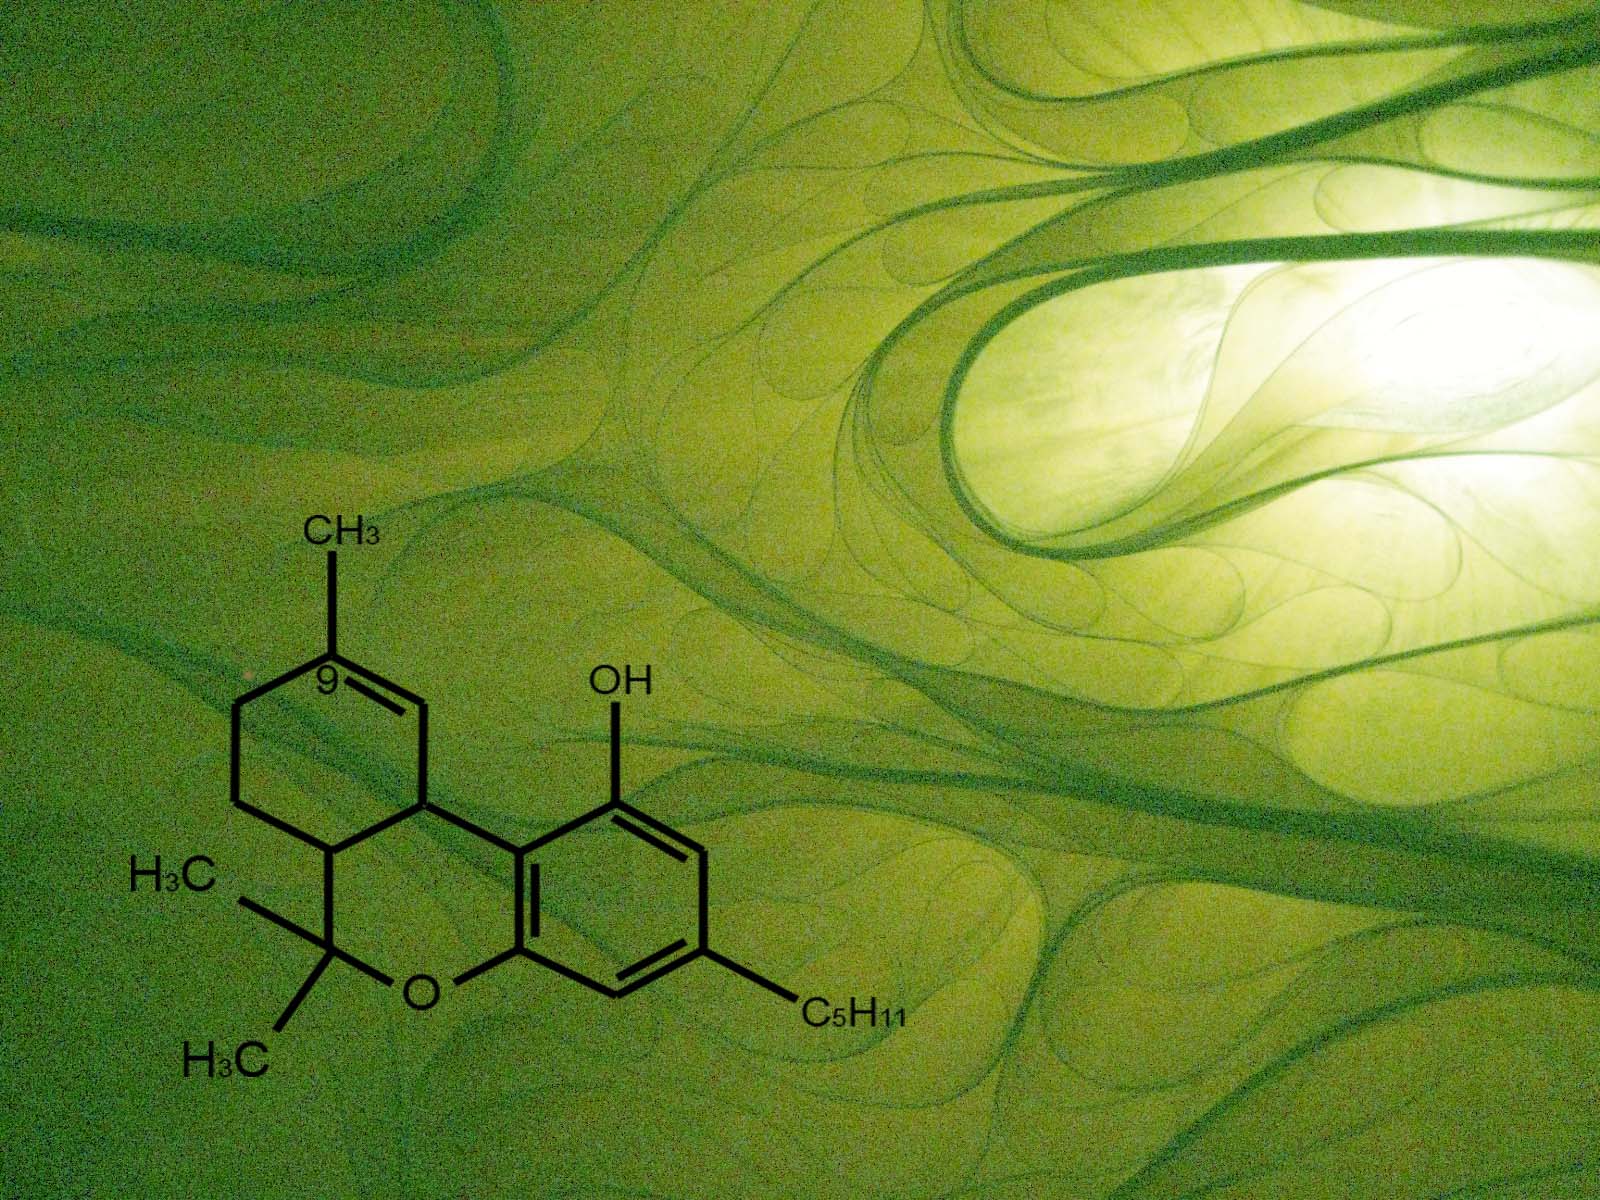 Free download Chemistry Wallpaper Background Chemistry Background Image [1600x1200] for your Desktop, Mobile & Tablet. Explore Organic Chemistry Wallpaper. Chemistry Wallpaper, HD Chemistry Wallpaper, Chemistry Wallpaper Desktop